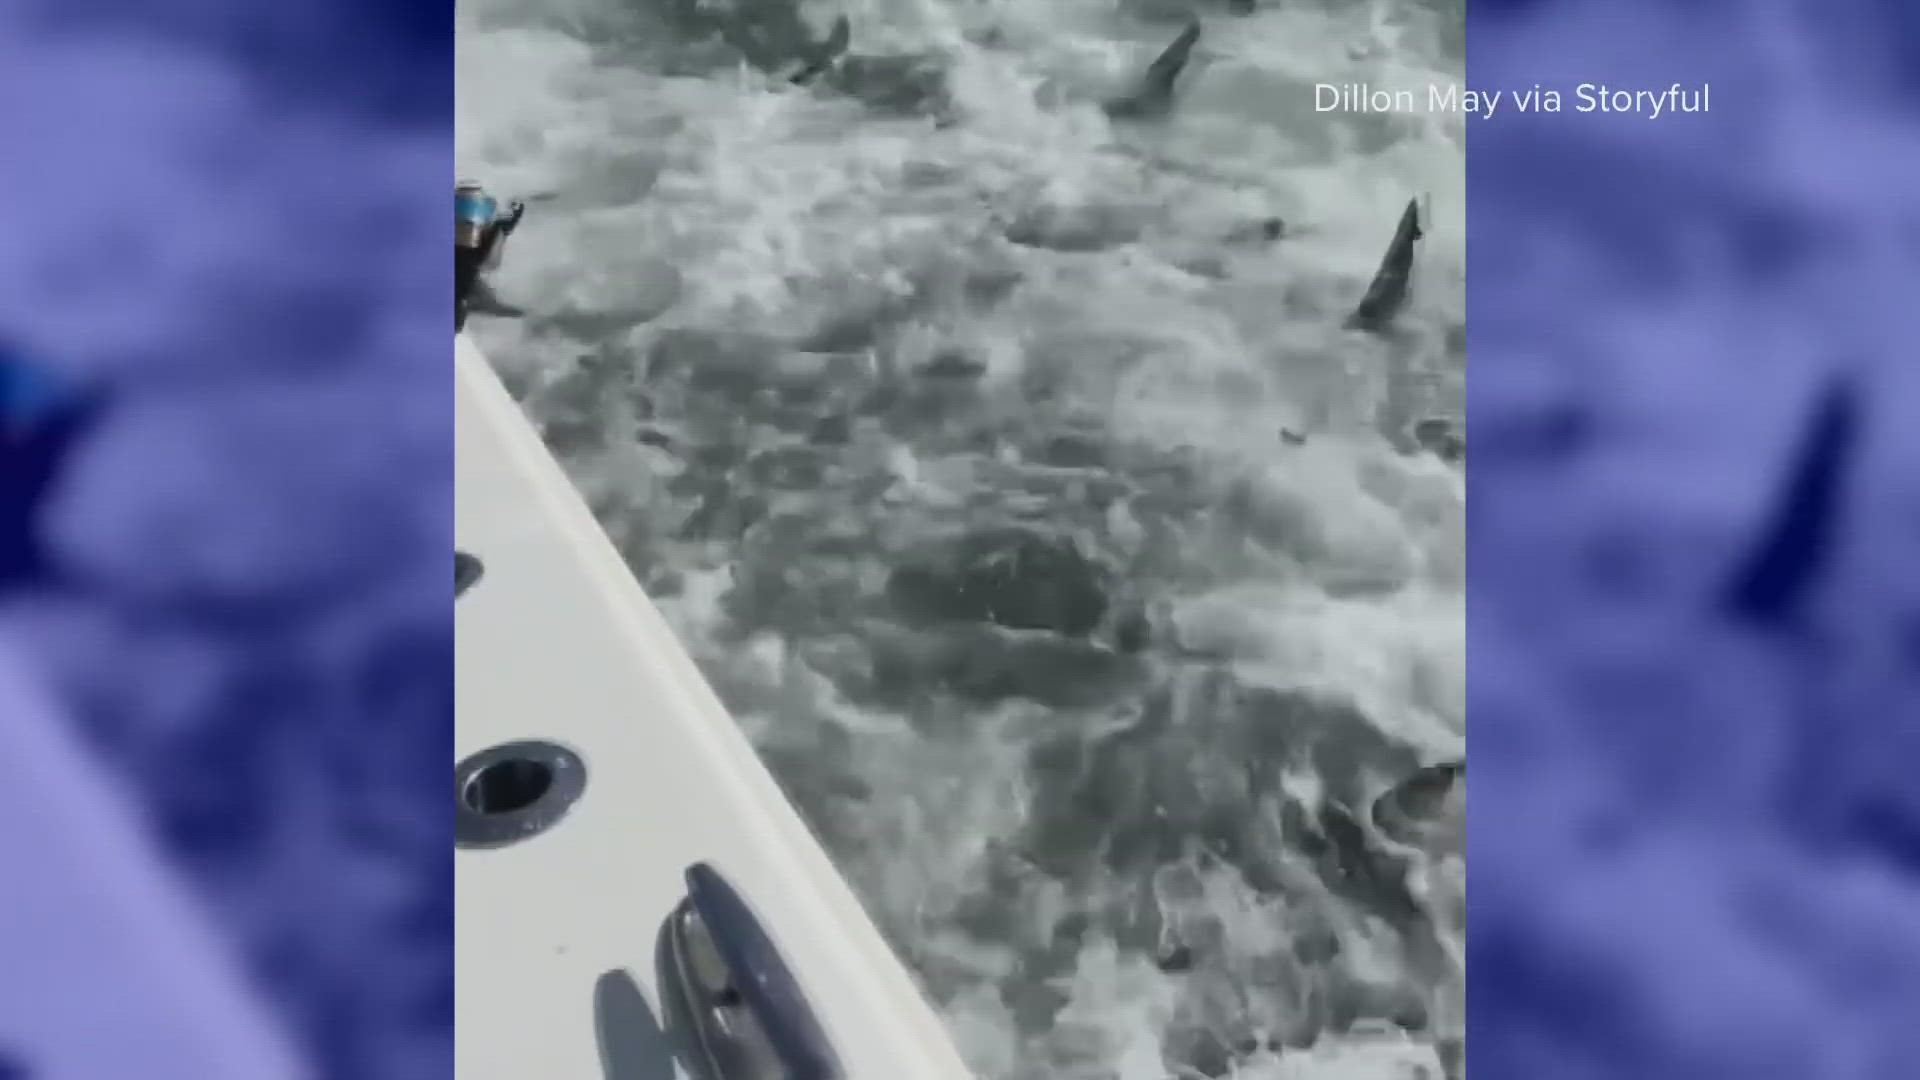 An extraordinary viral video of a feeding frenzy has people asking what's going on.